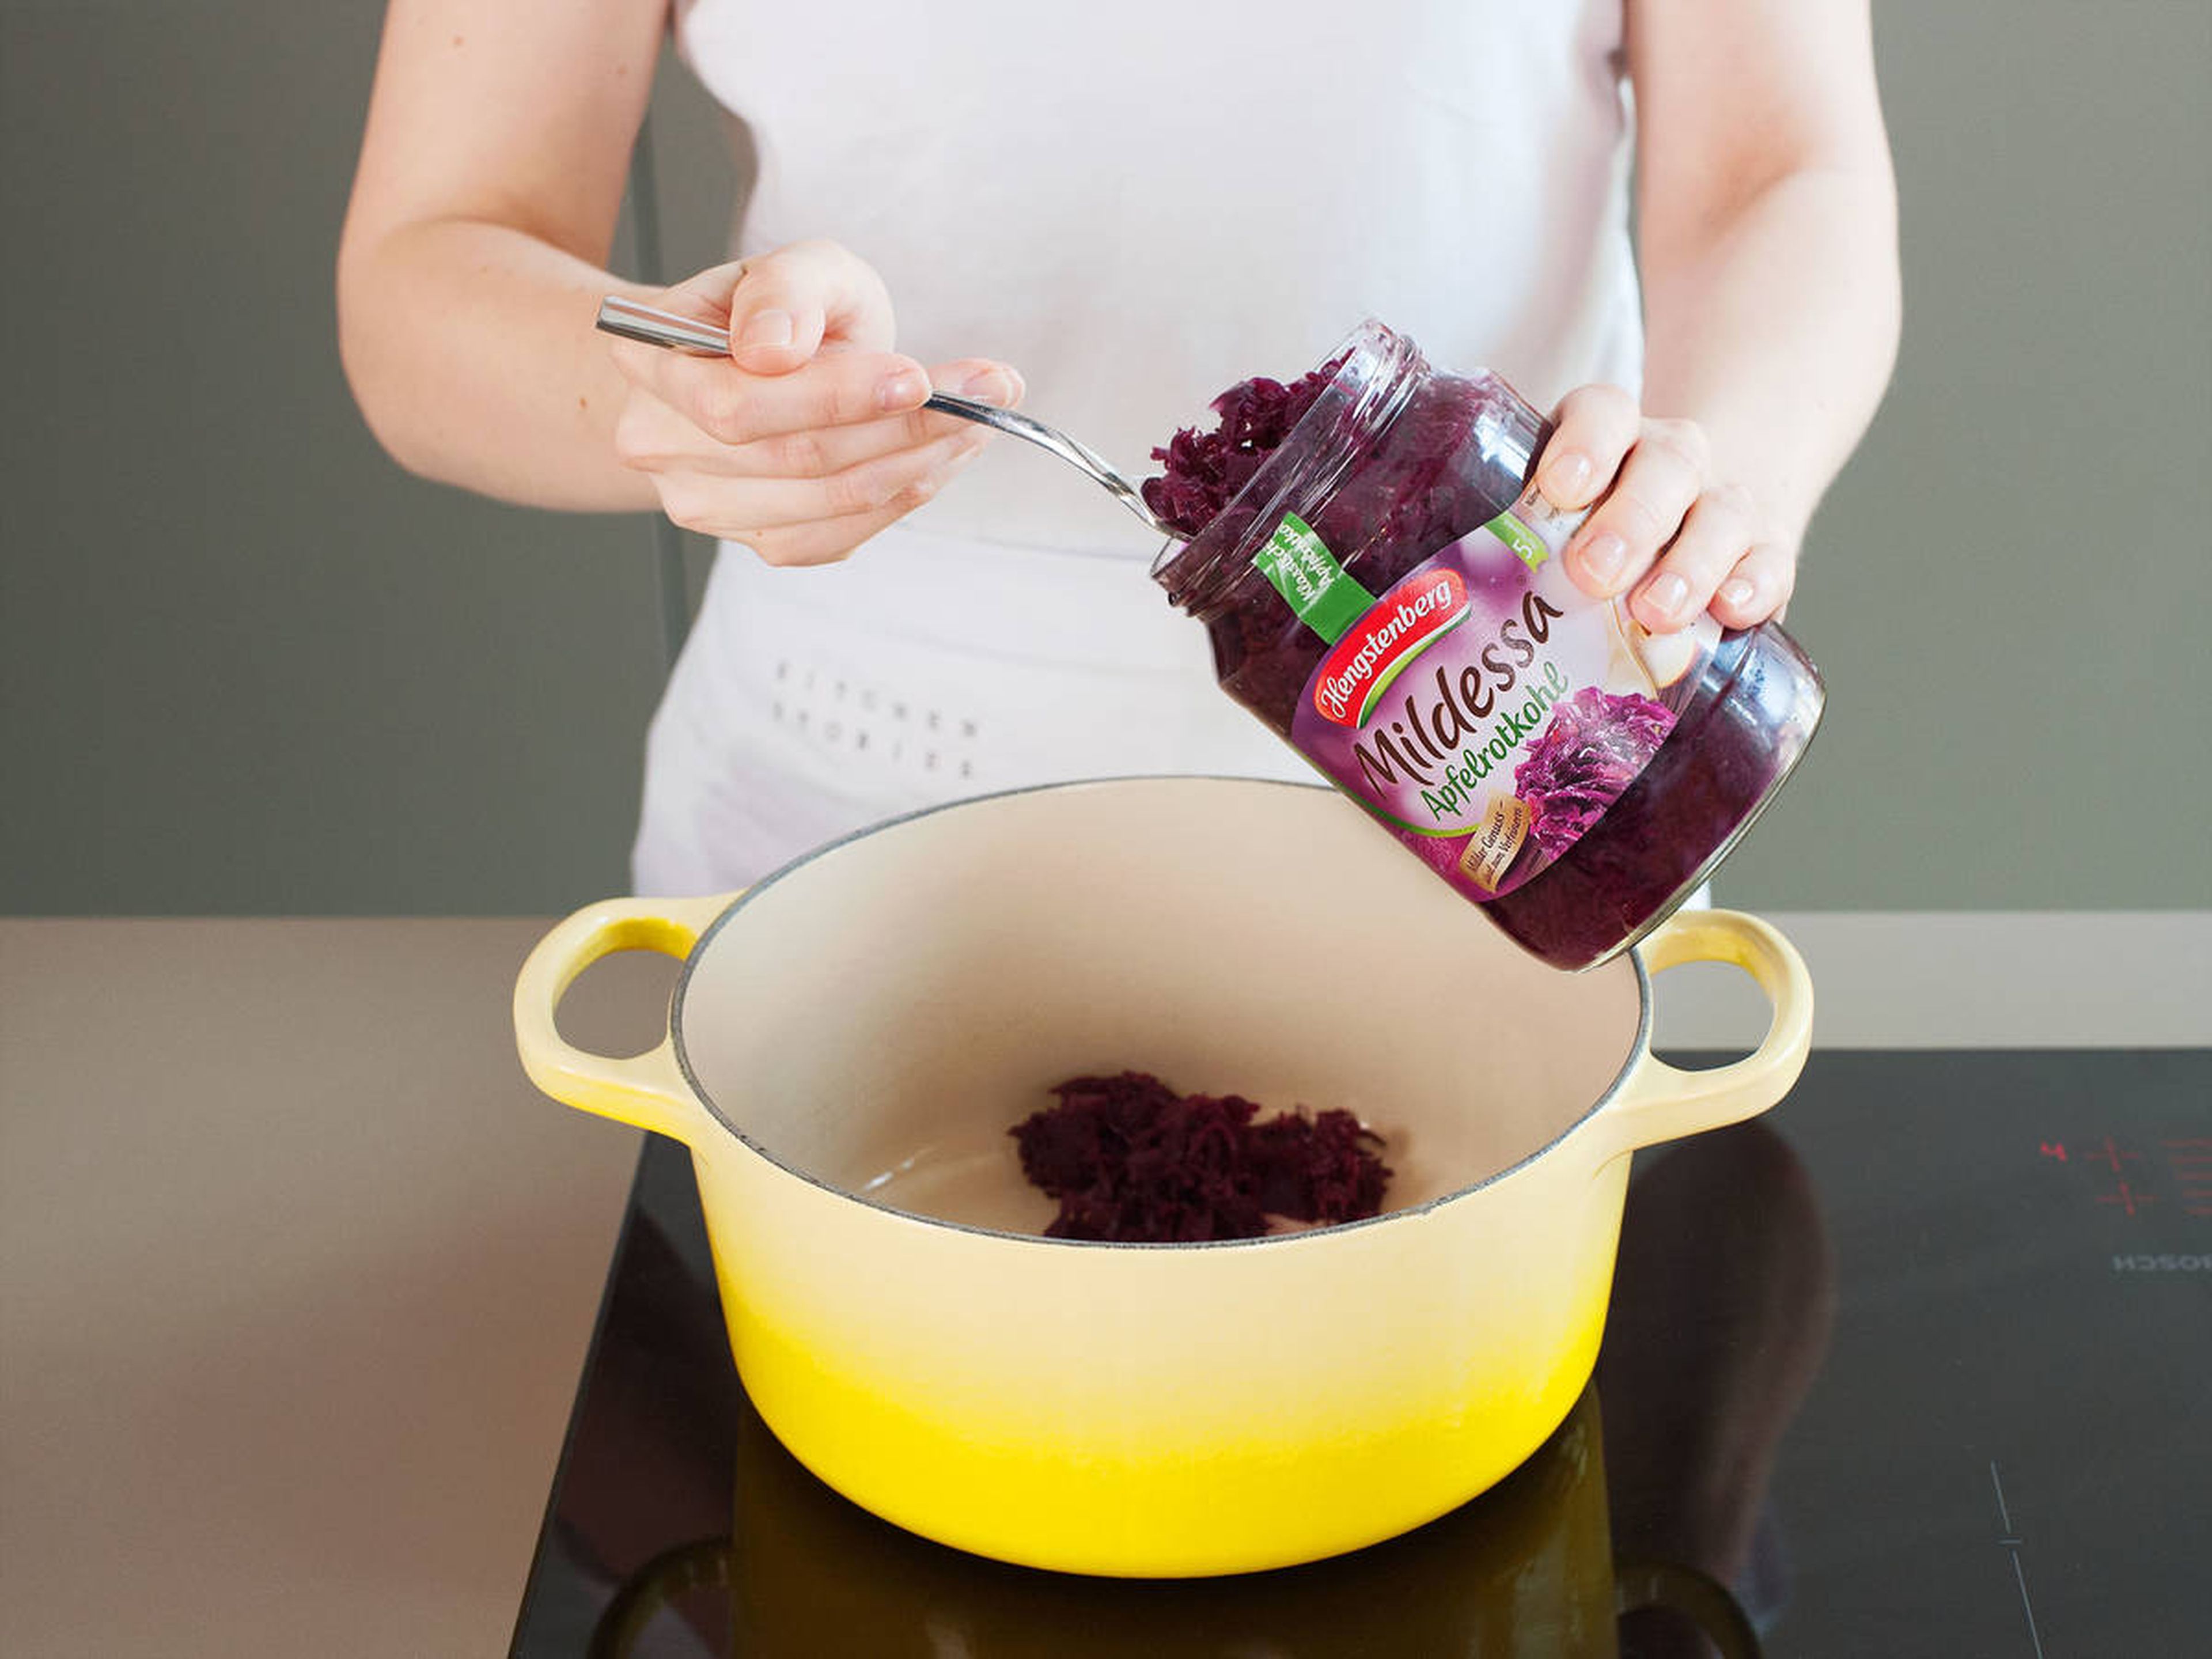 In a large saucepan, heat up some red cabbage over medium heat for approx. 8 – 10 min. Remove from heat, cover, and set aside.